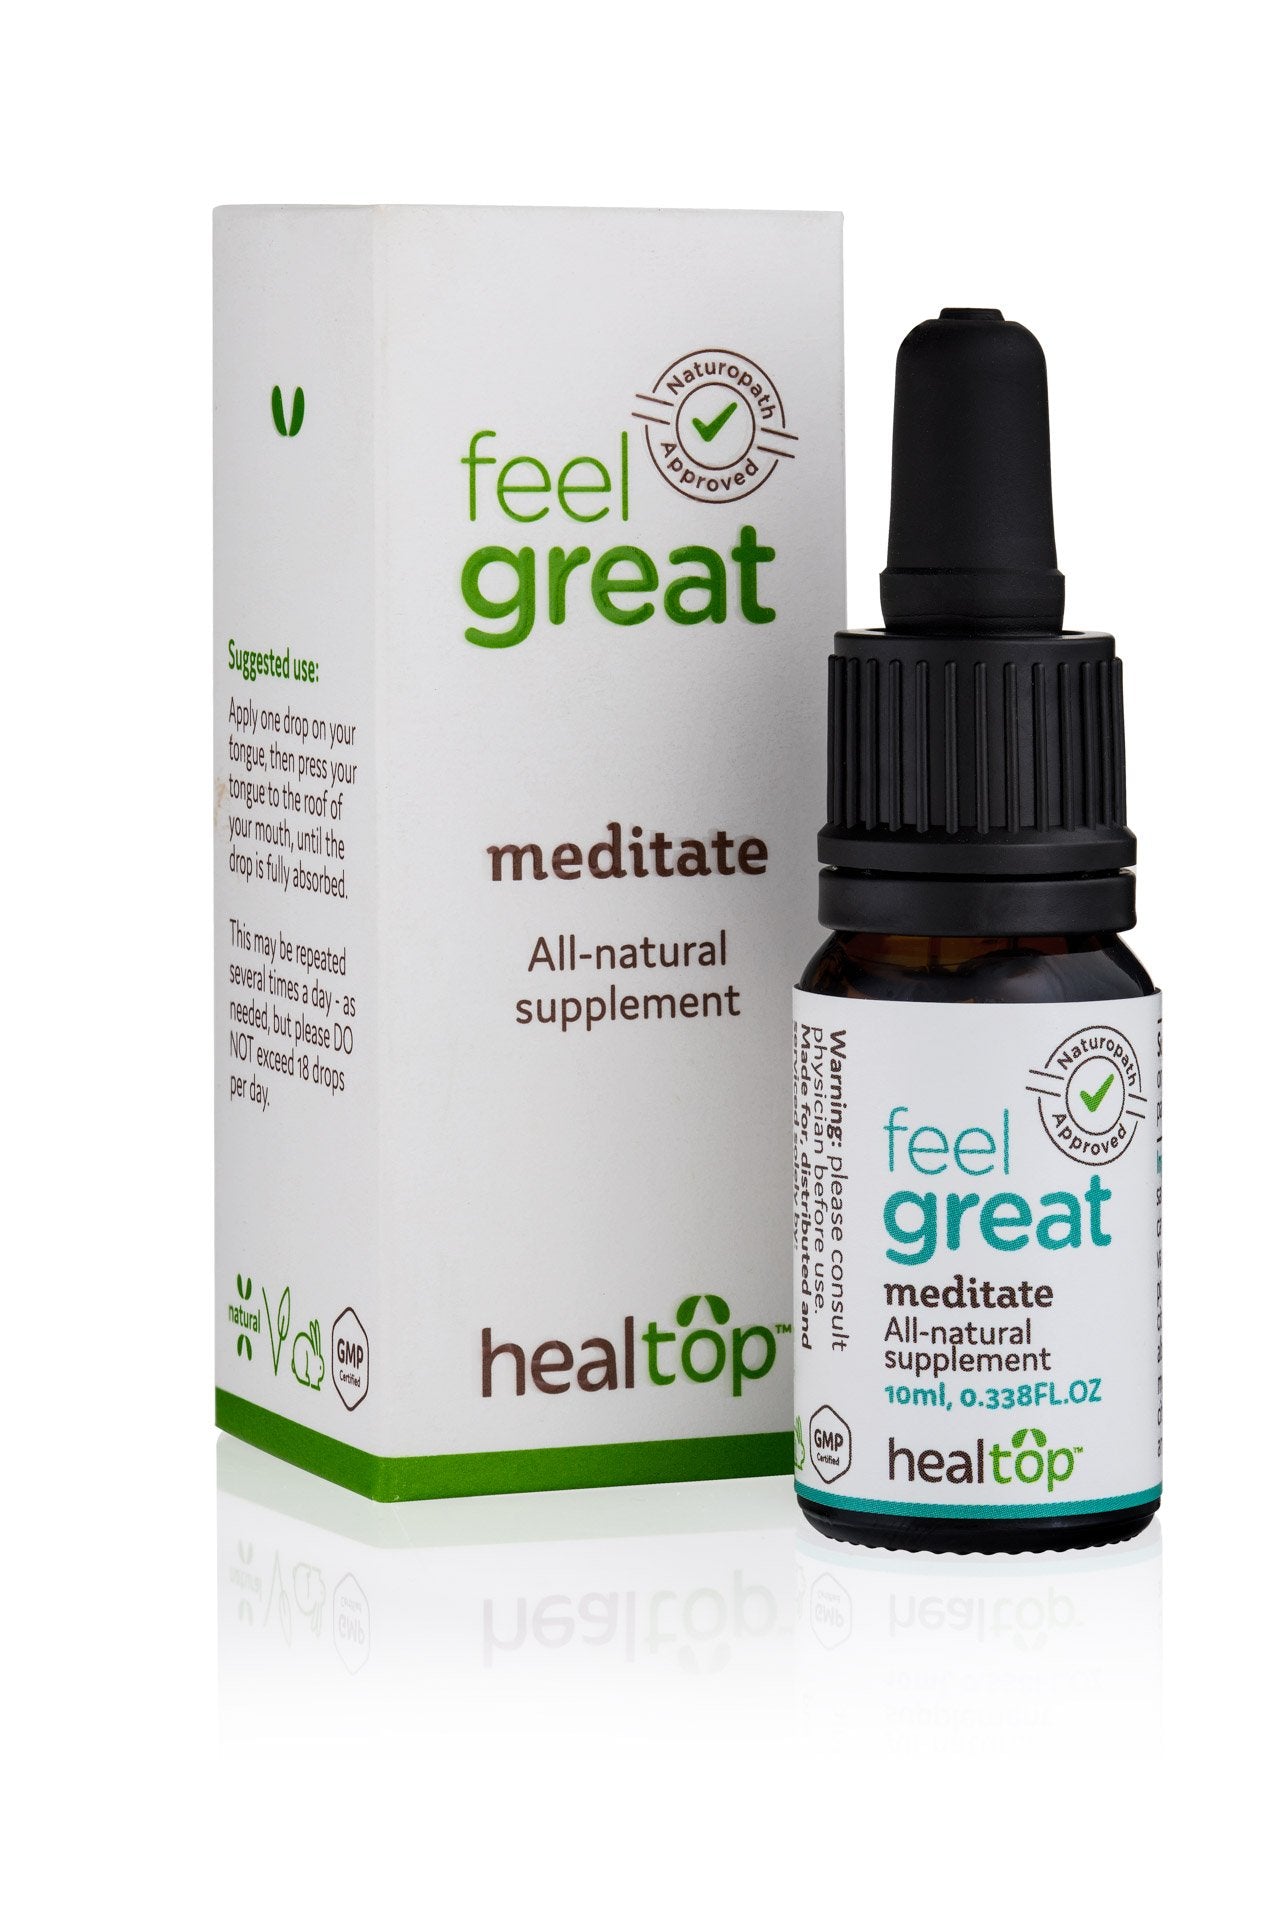 Meditate - All-Natural Supplement - feelgreat.co